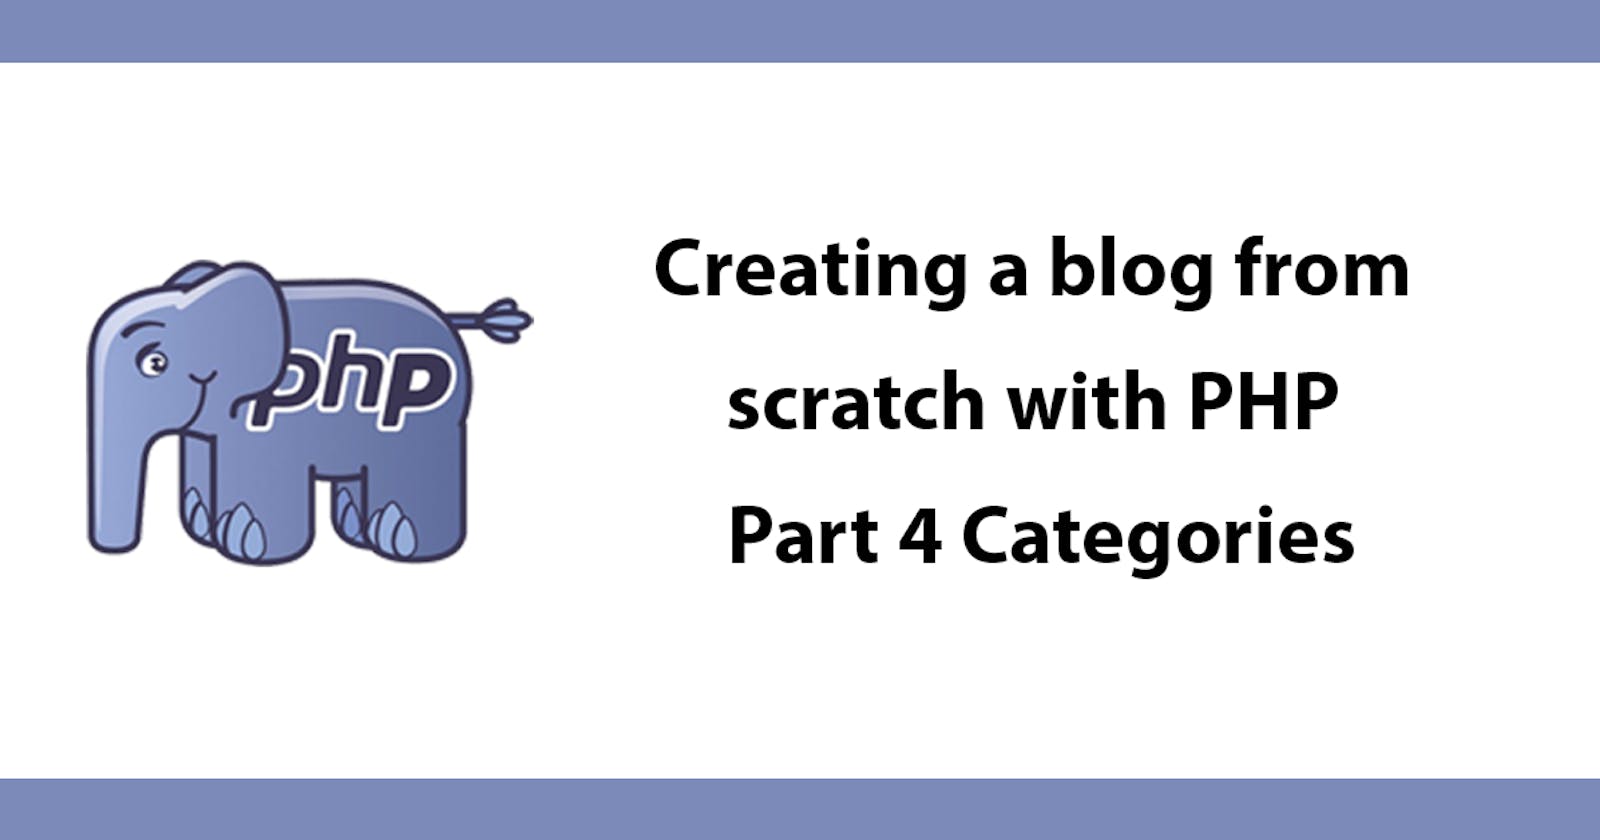 Creating a blog from scratch with PHP - Part 4 Categories